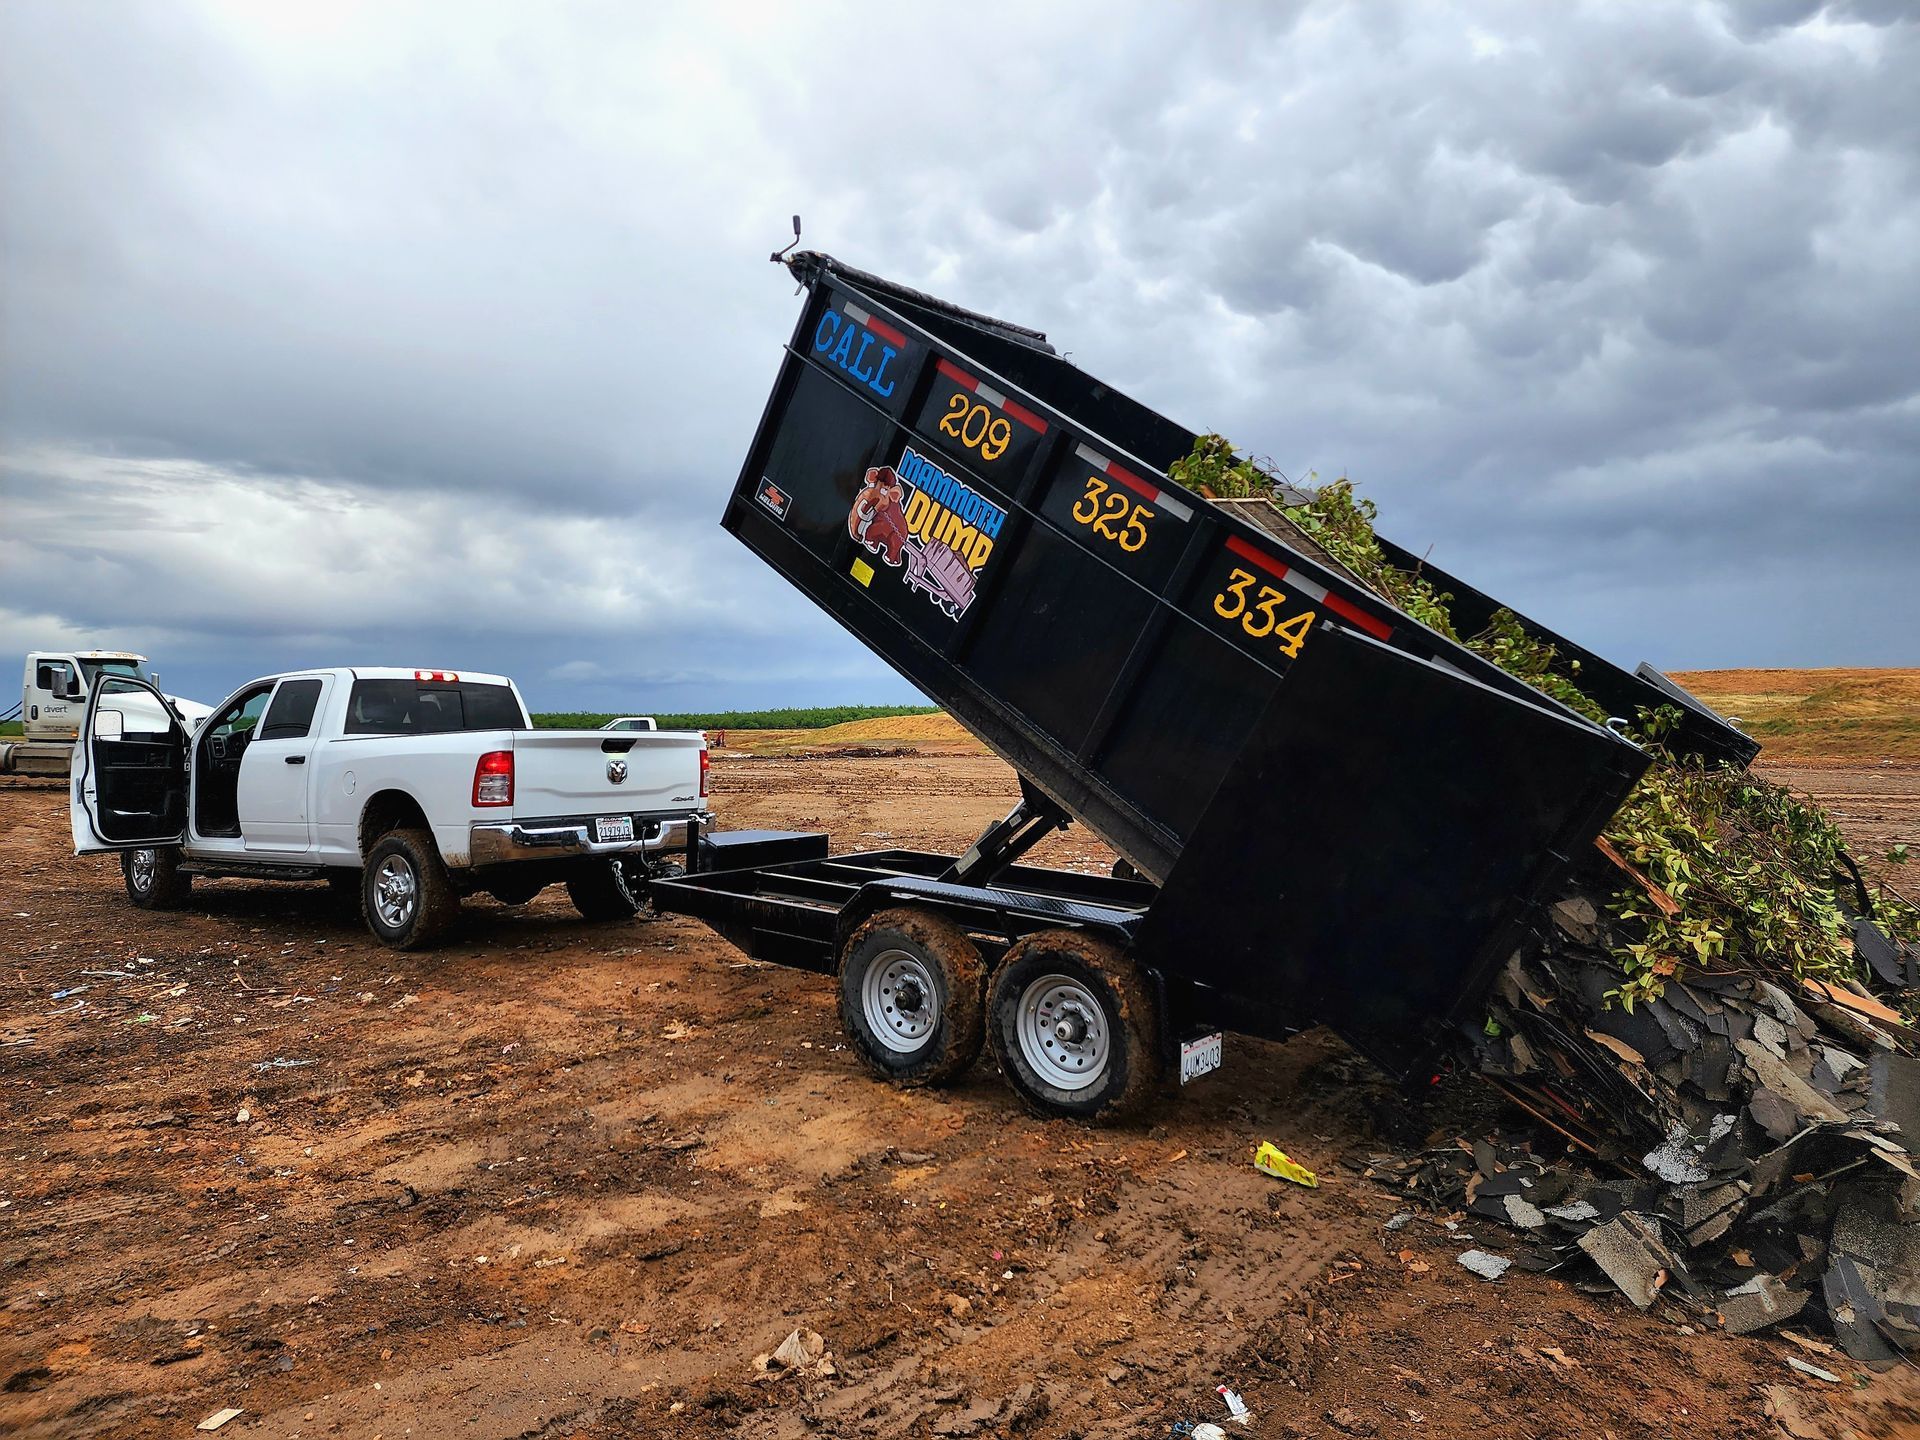 A 15-yard dumpster unloading roofing shingles and tree waste at a landfill, showing a mix of construction and organic debris.